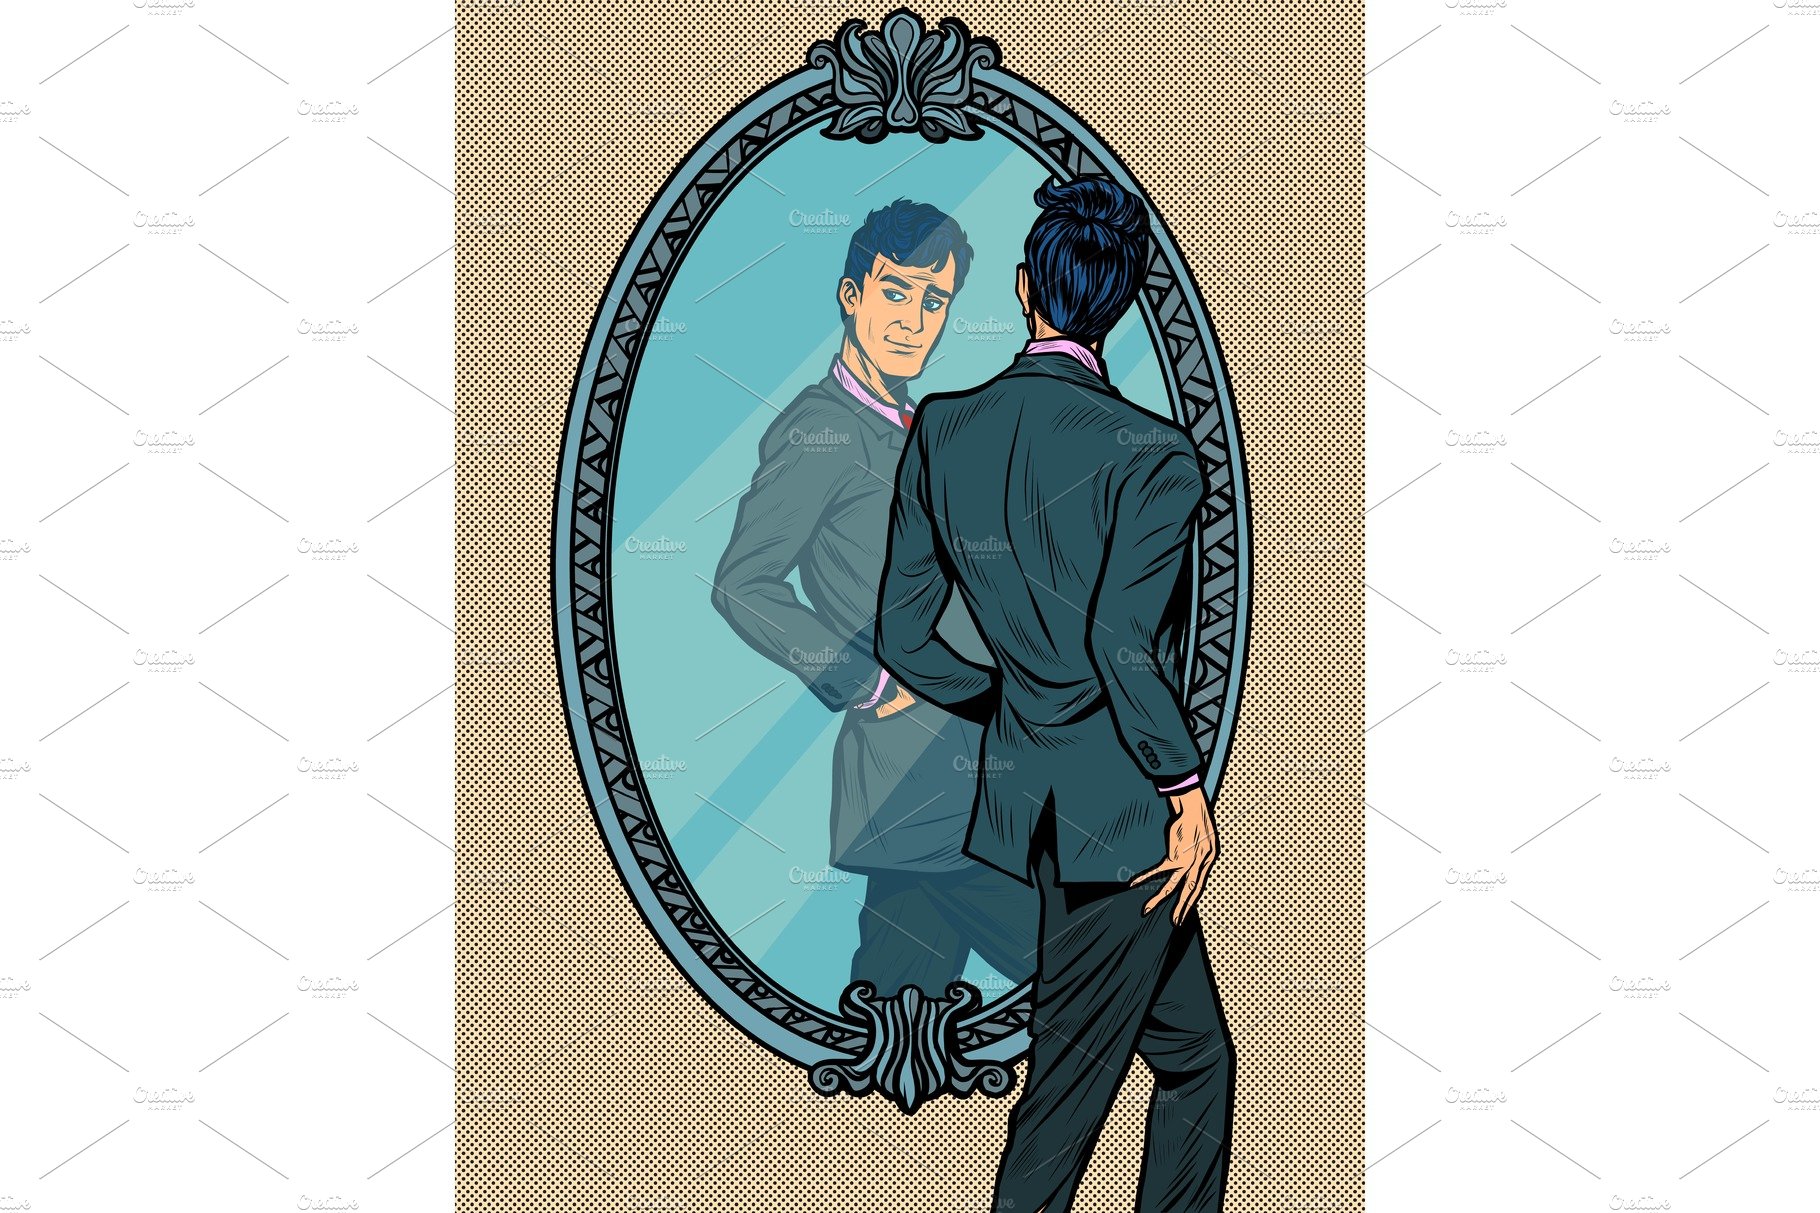 A man in a suit looks in the mirror cover image.